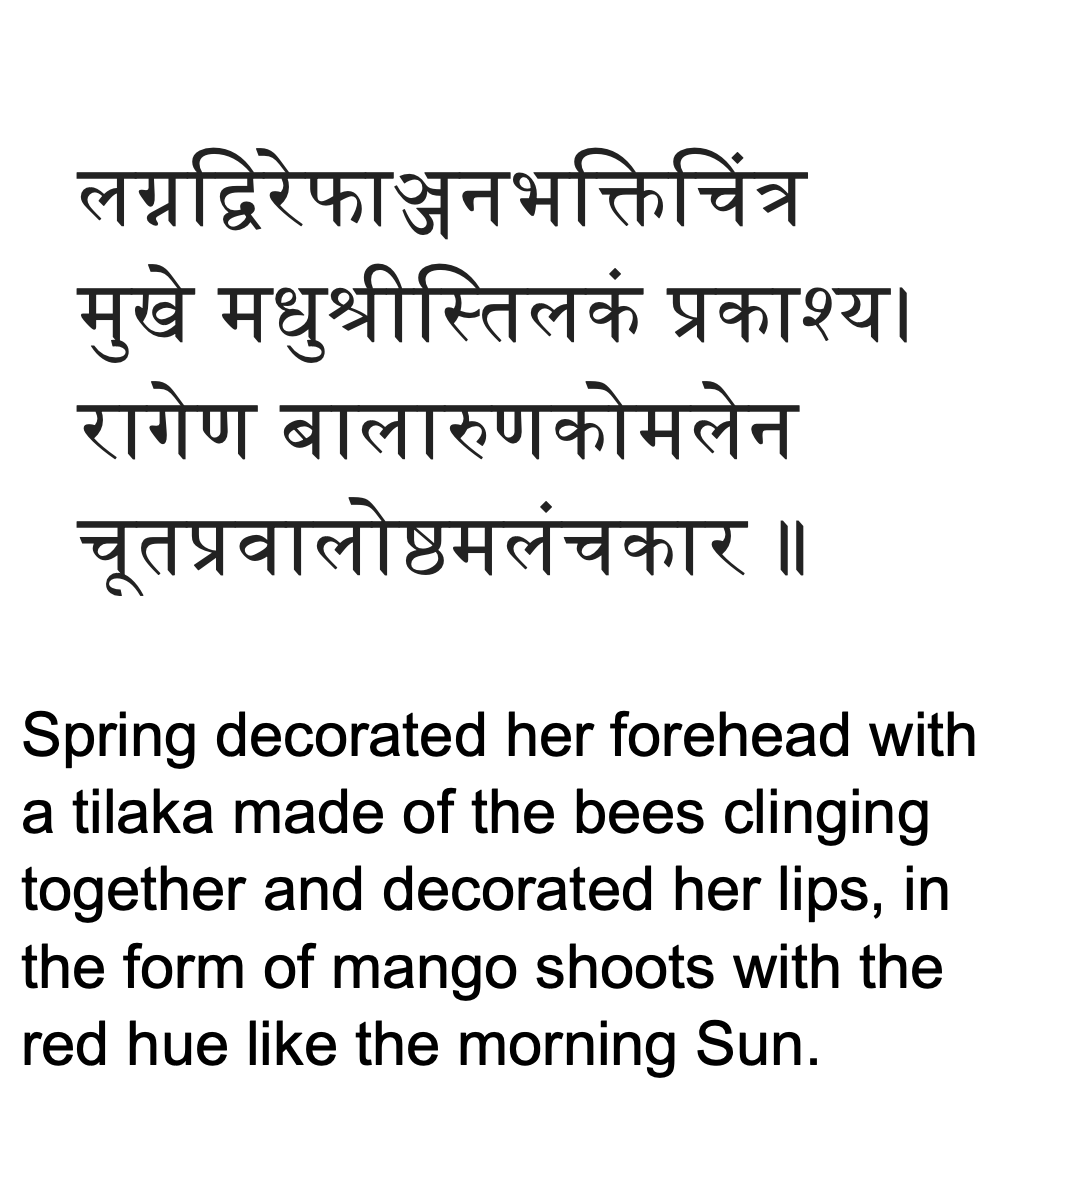 There is no respite to Kalidasa's description of Spring's beauty after Madana enters. The reason is that he is trying to show even such splendor couldn't disturb Shiva's tapas. [From Kumarasambhavam, 3.30].